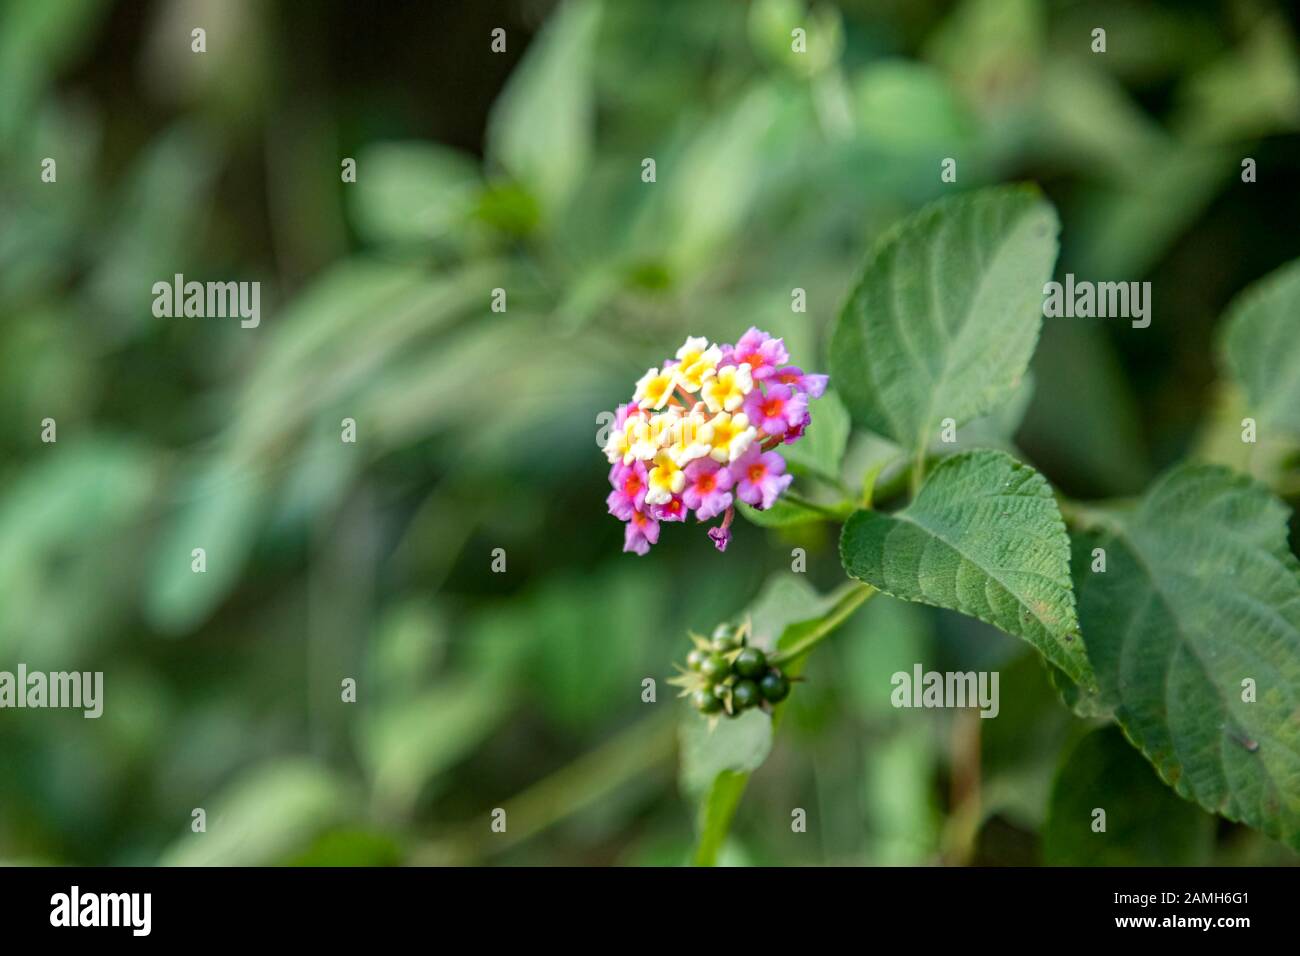 Lantana or West Indian Lantana flowers blooming in the garden Stock Photo